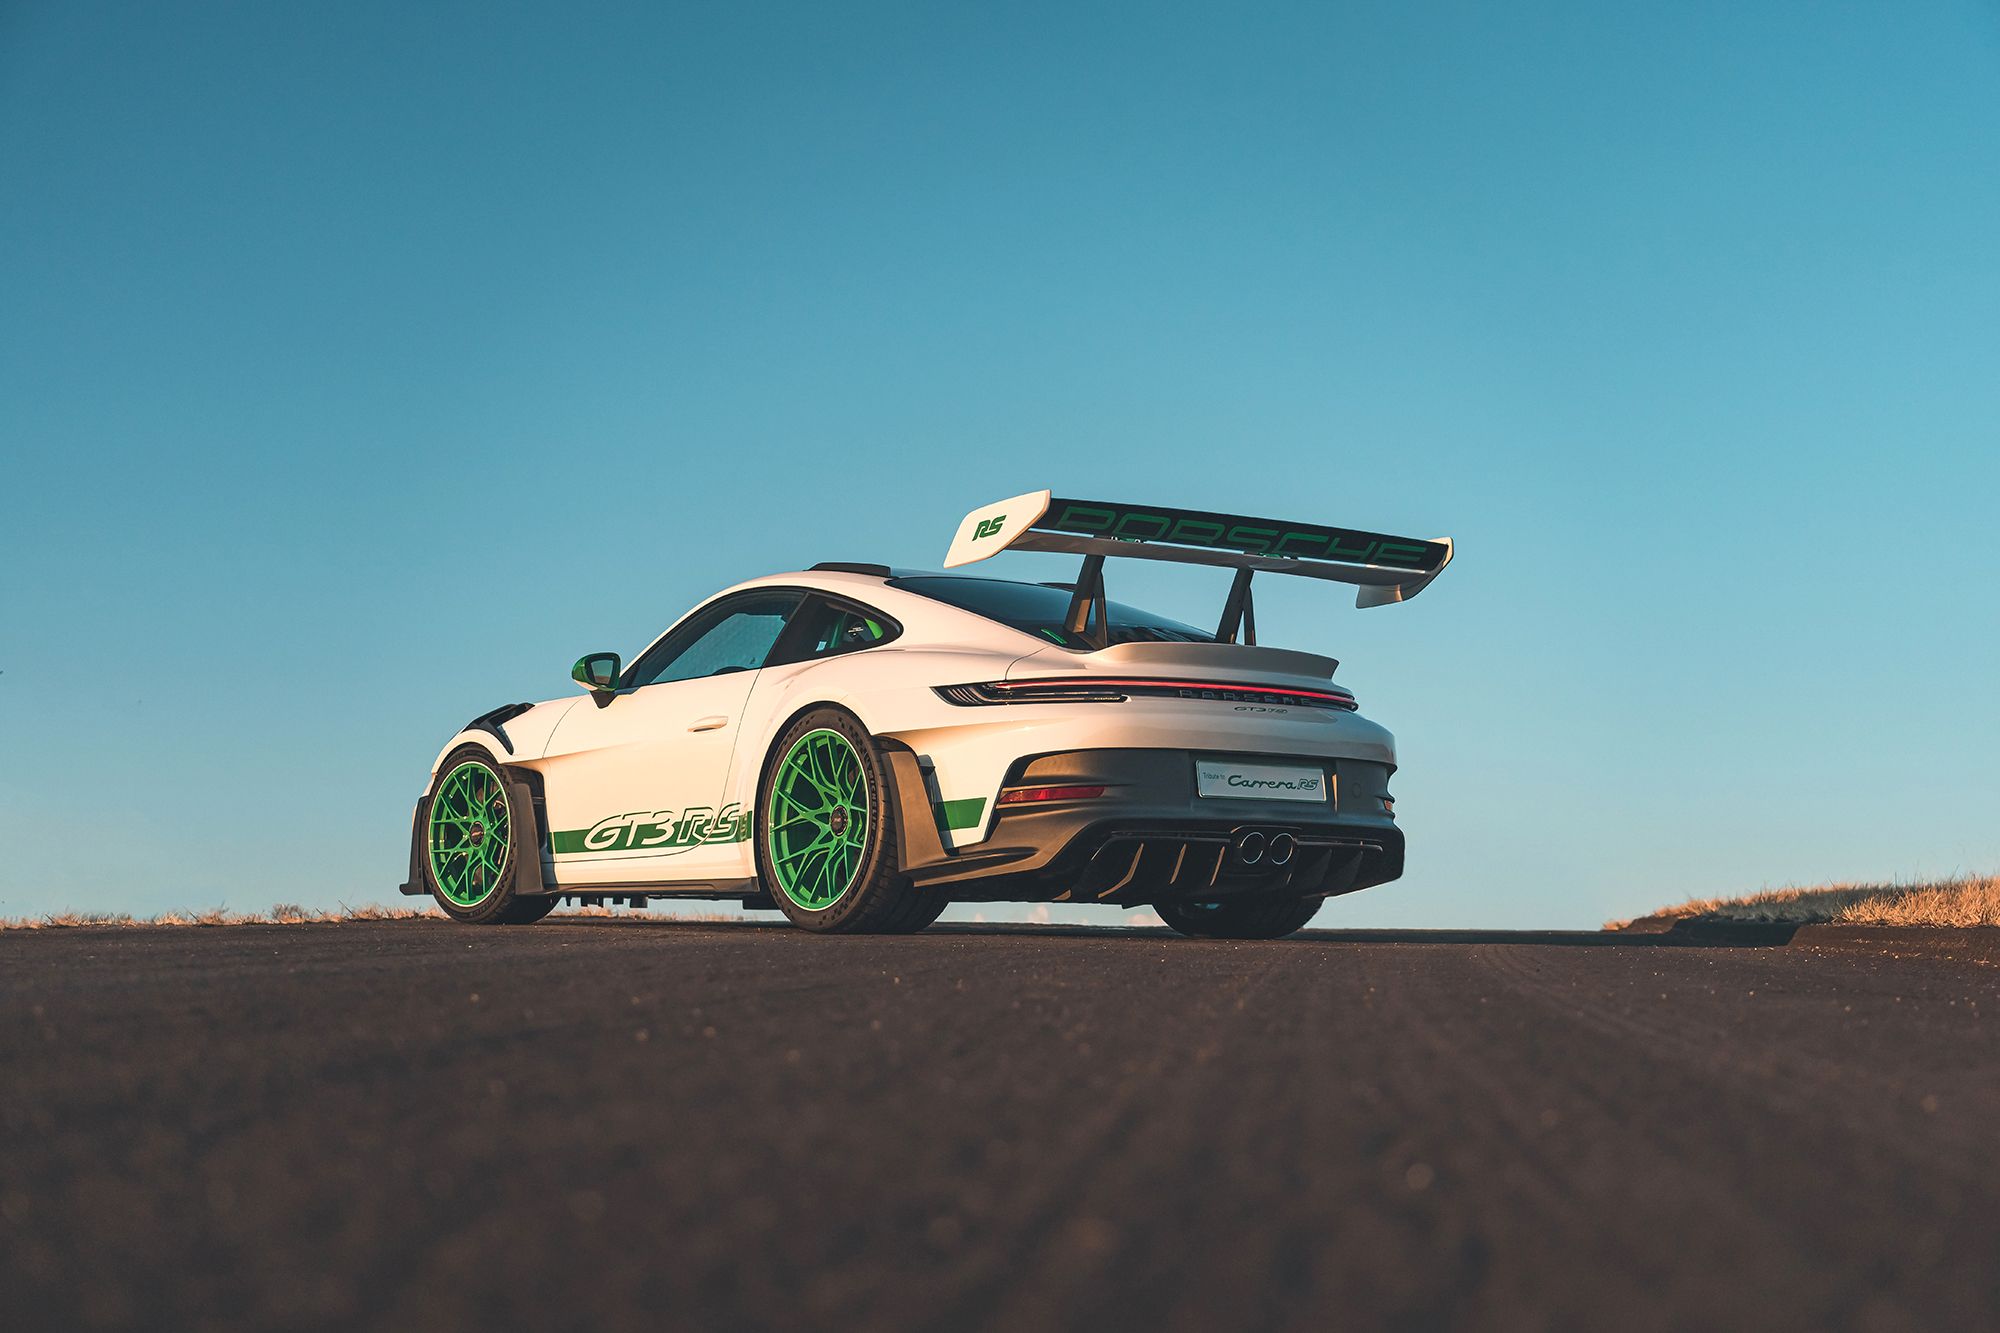 Porsche 911 GT3 RS by Bas Fransen on canvas poster wallpaper and more